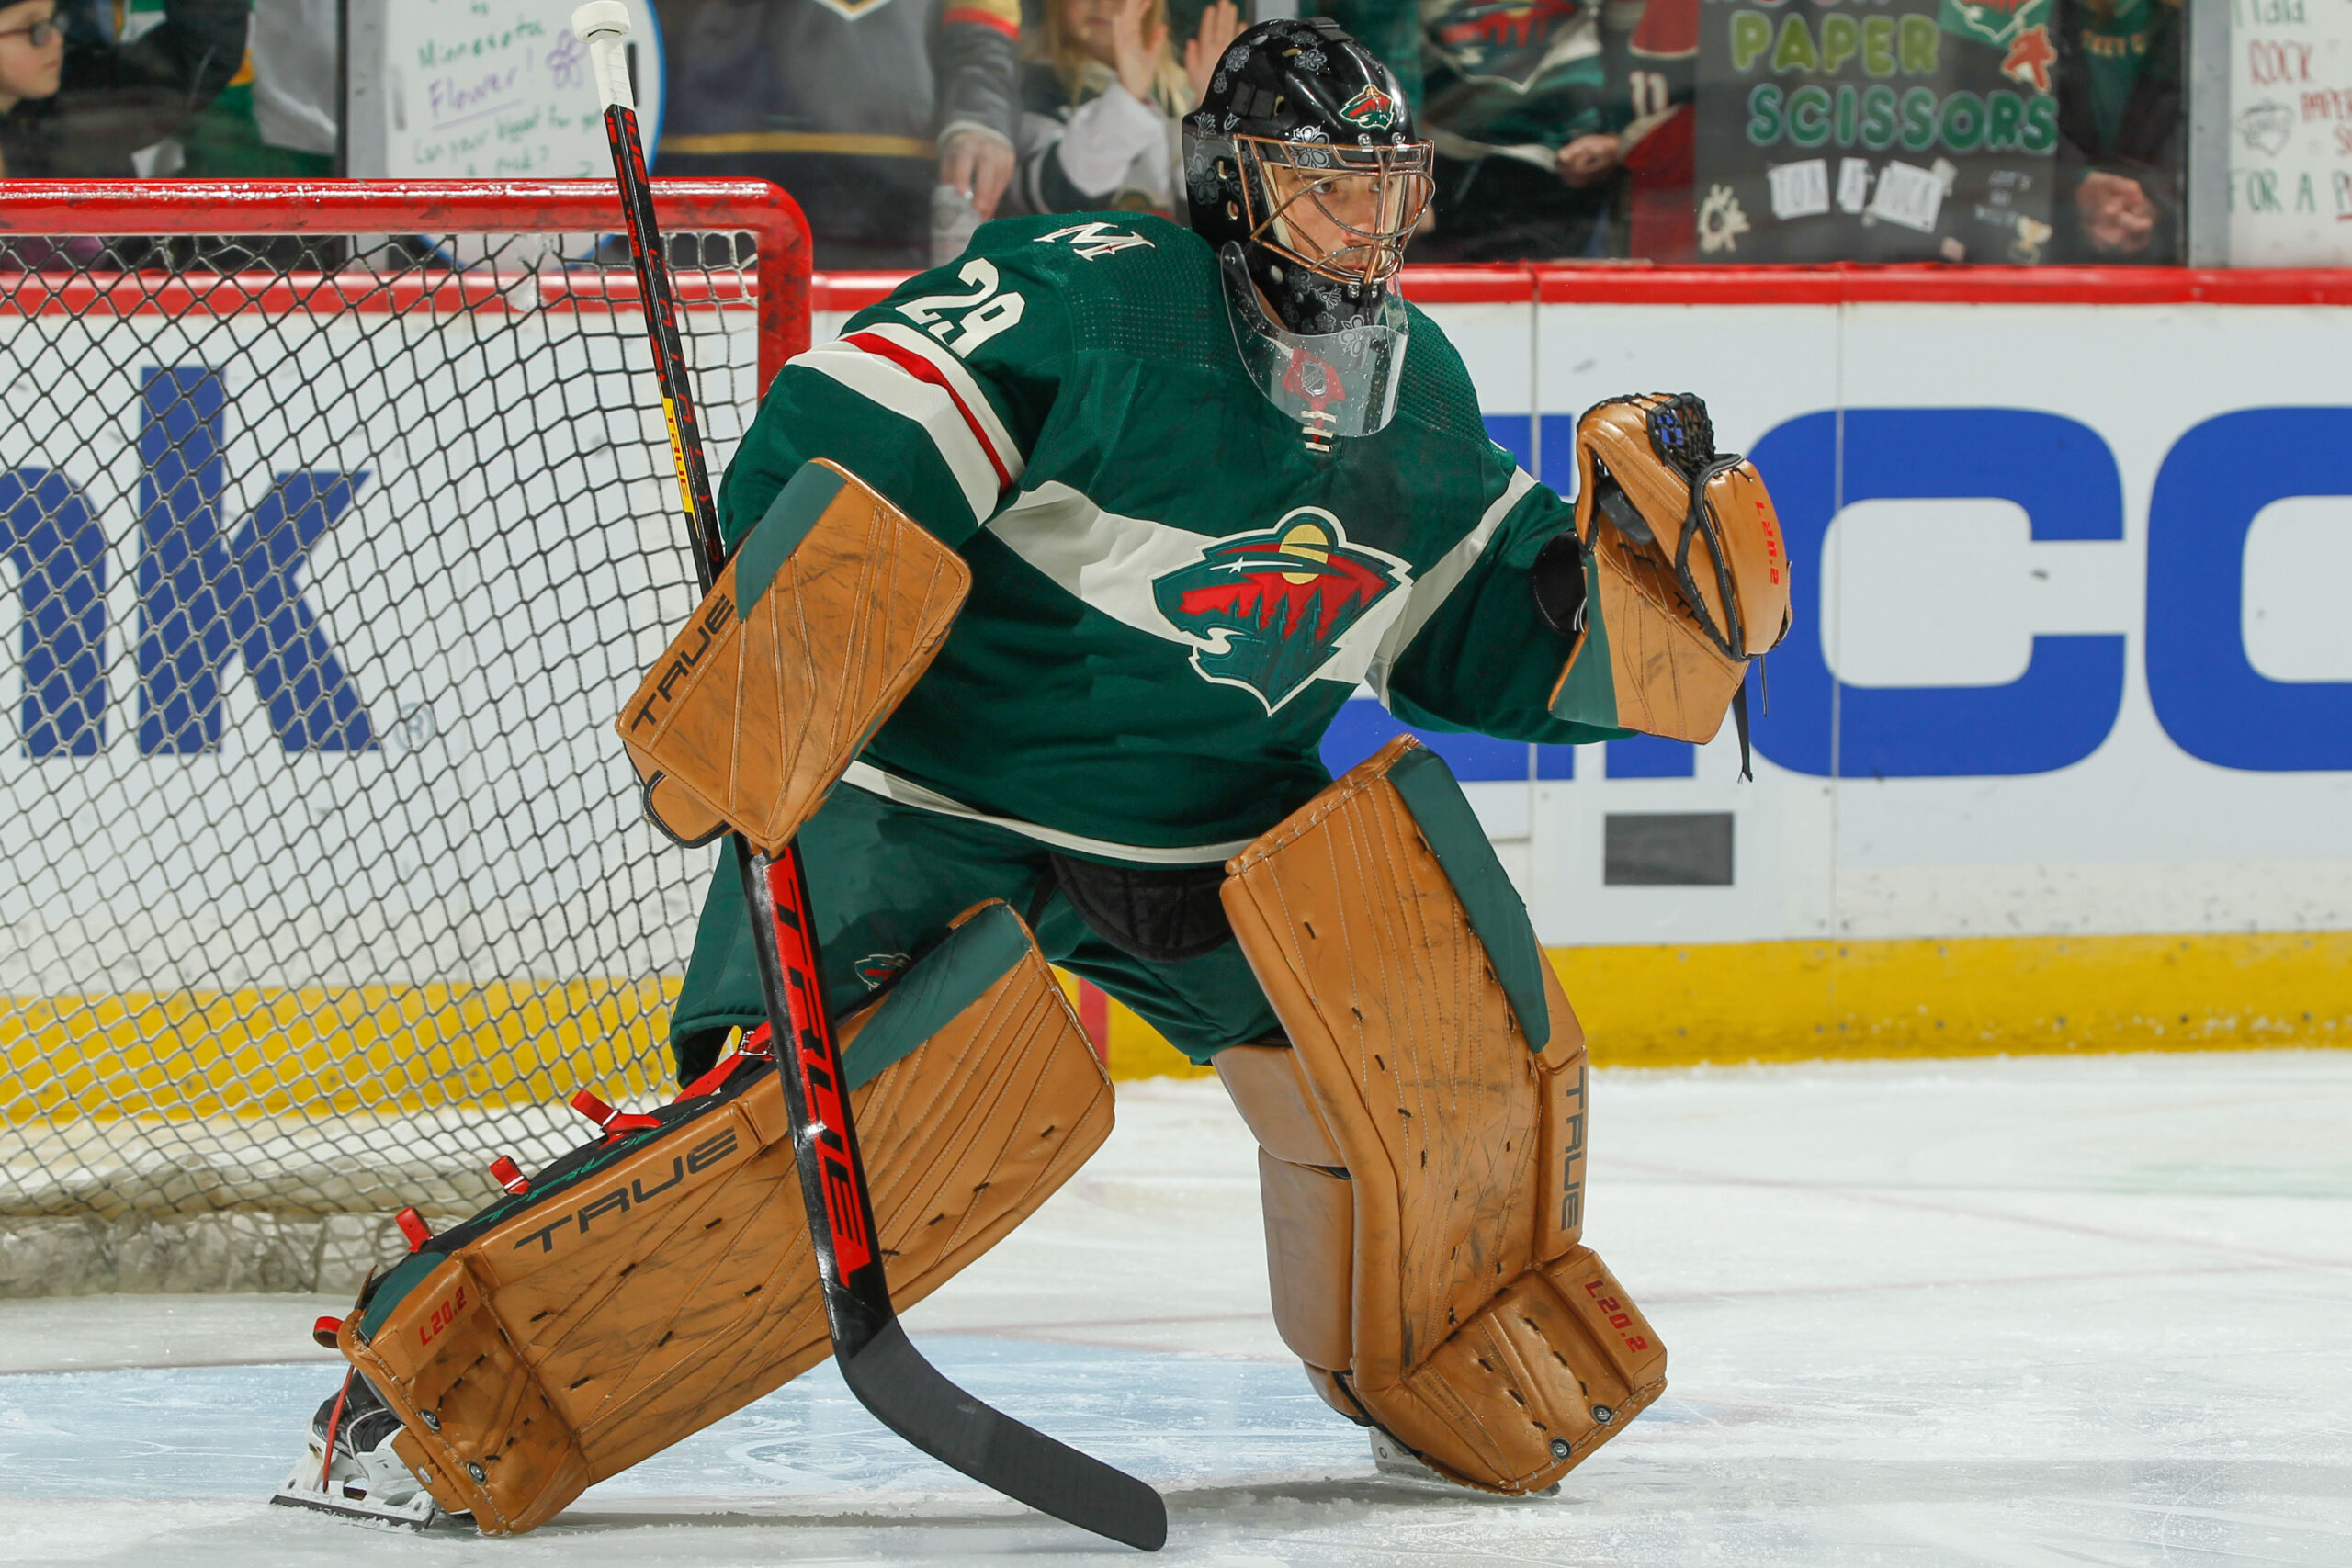 As signs emerge of Talbot starting, Wild coach won't reveal goalie for Game  6